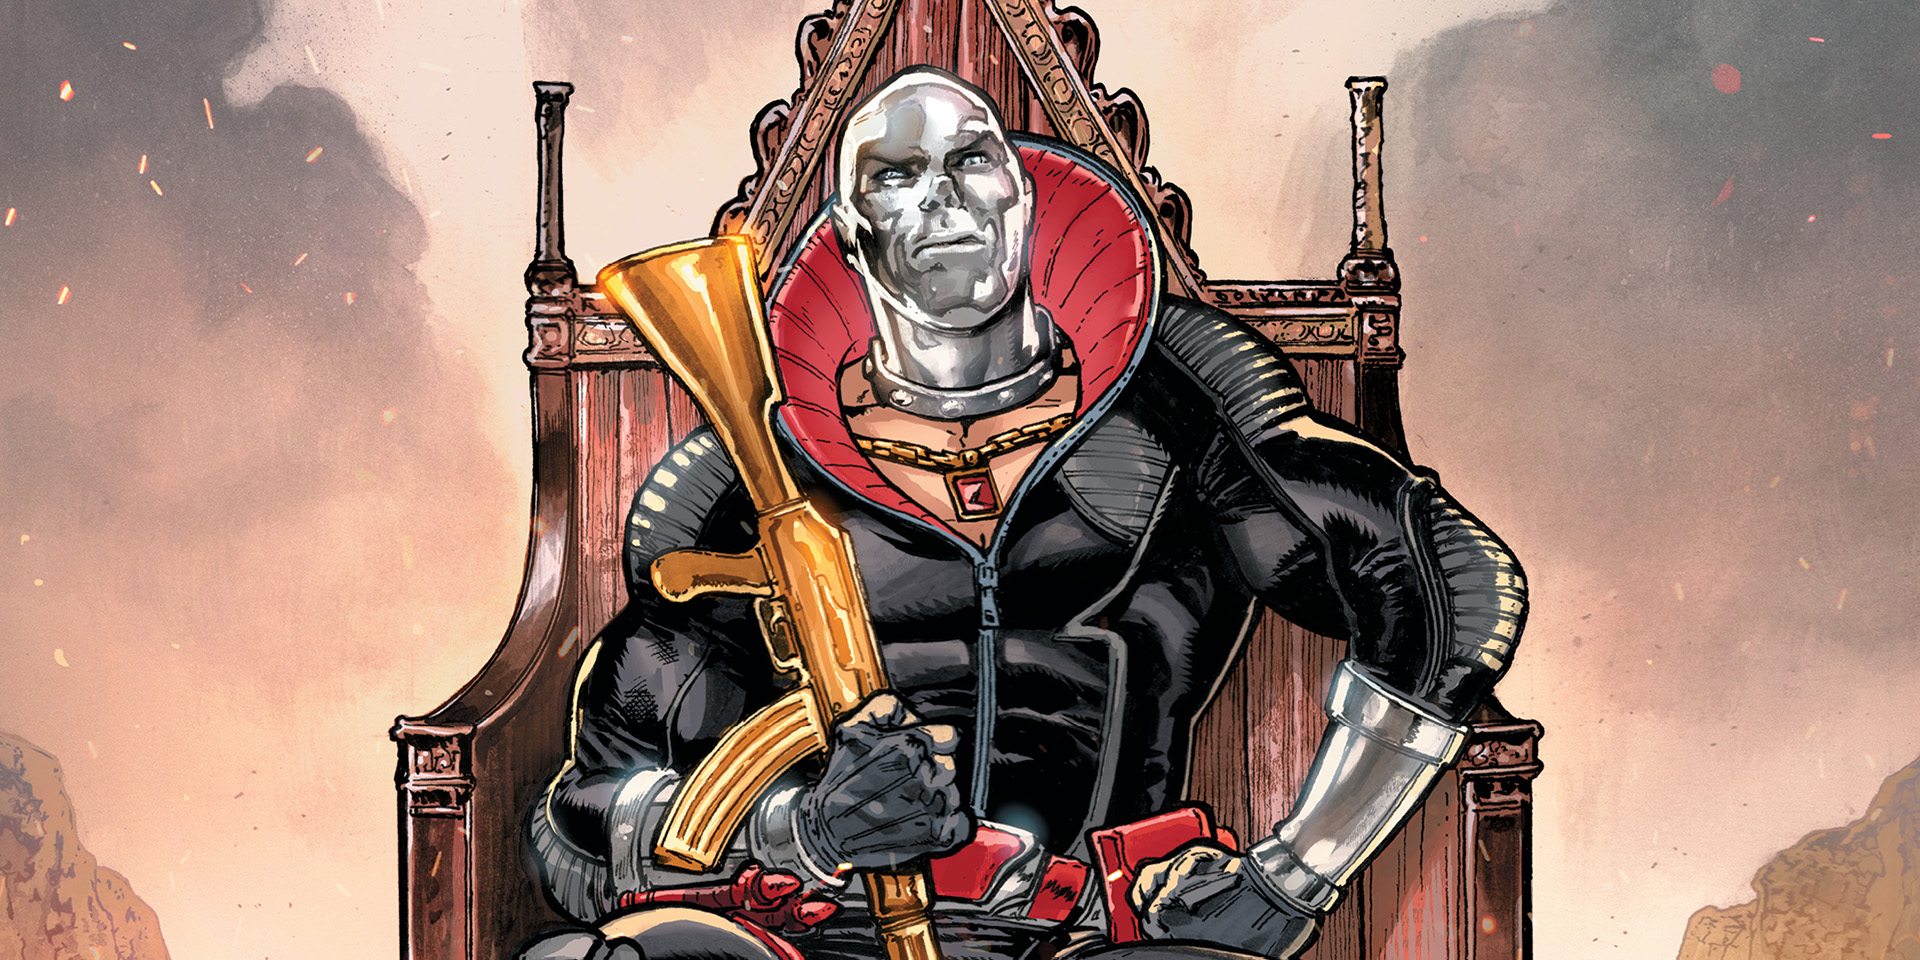 Check Out the Covers of Destro #1 by Dan Watters & Andrei Bressan